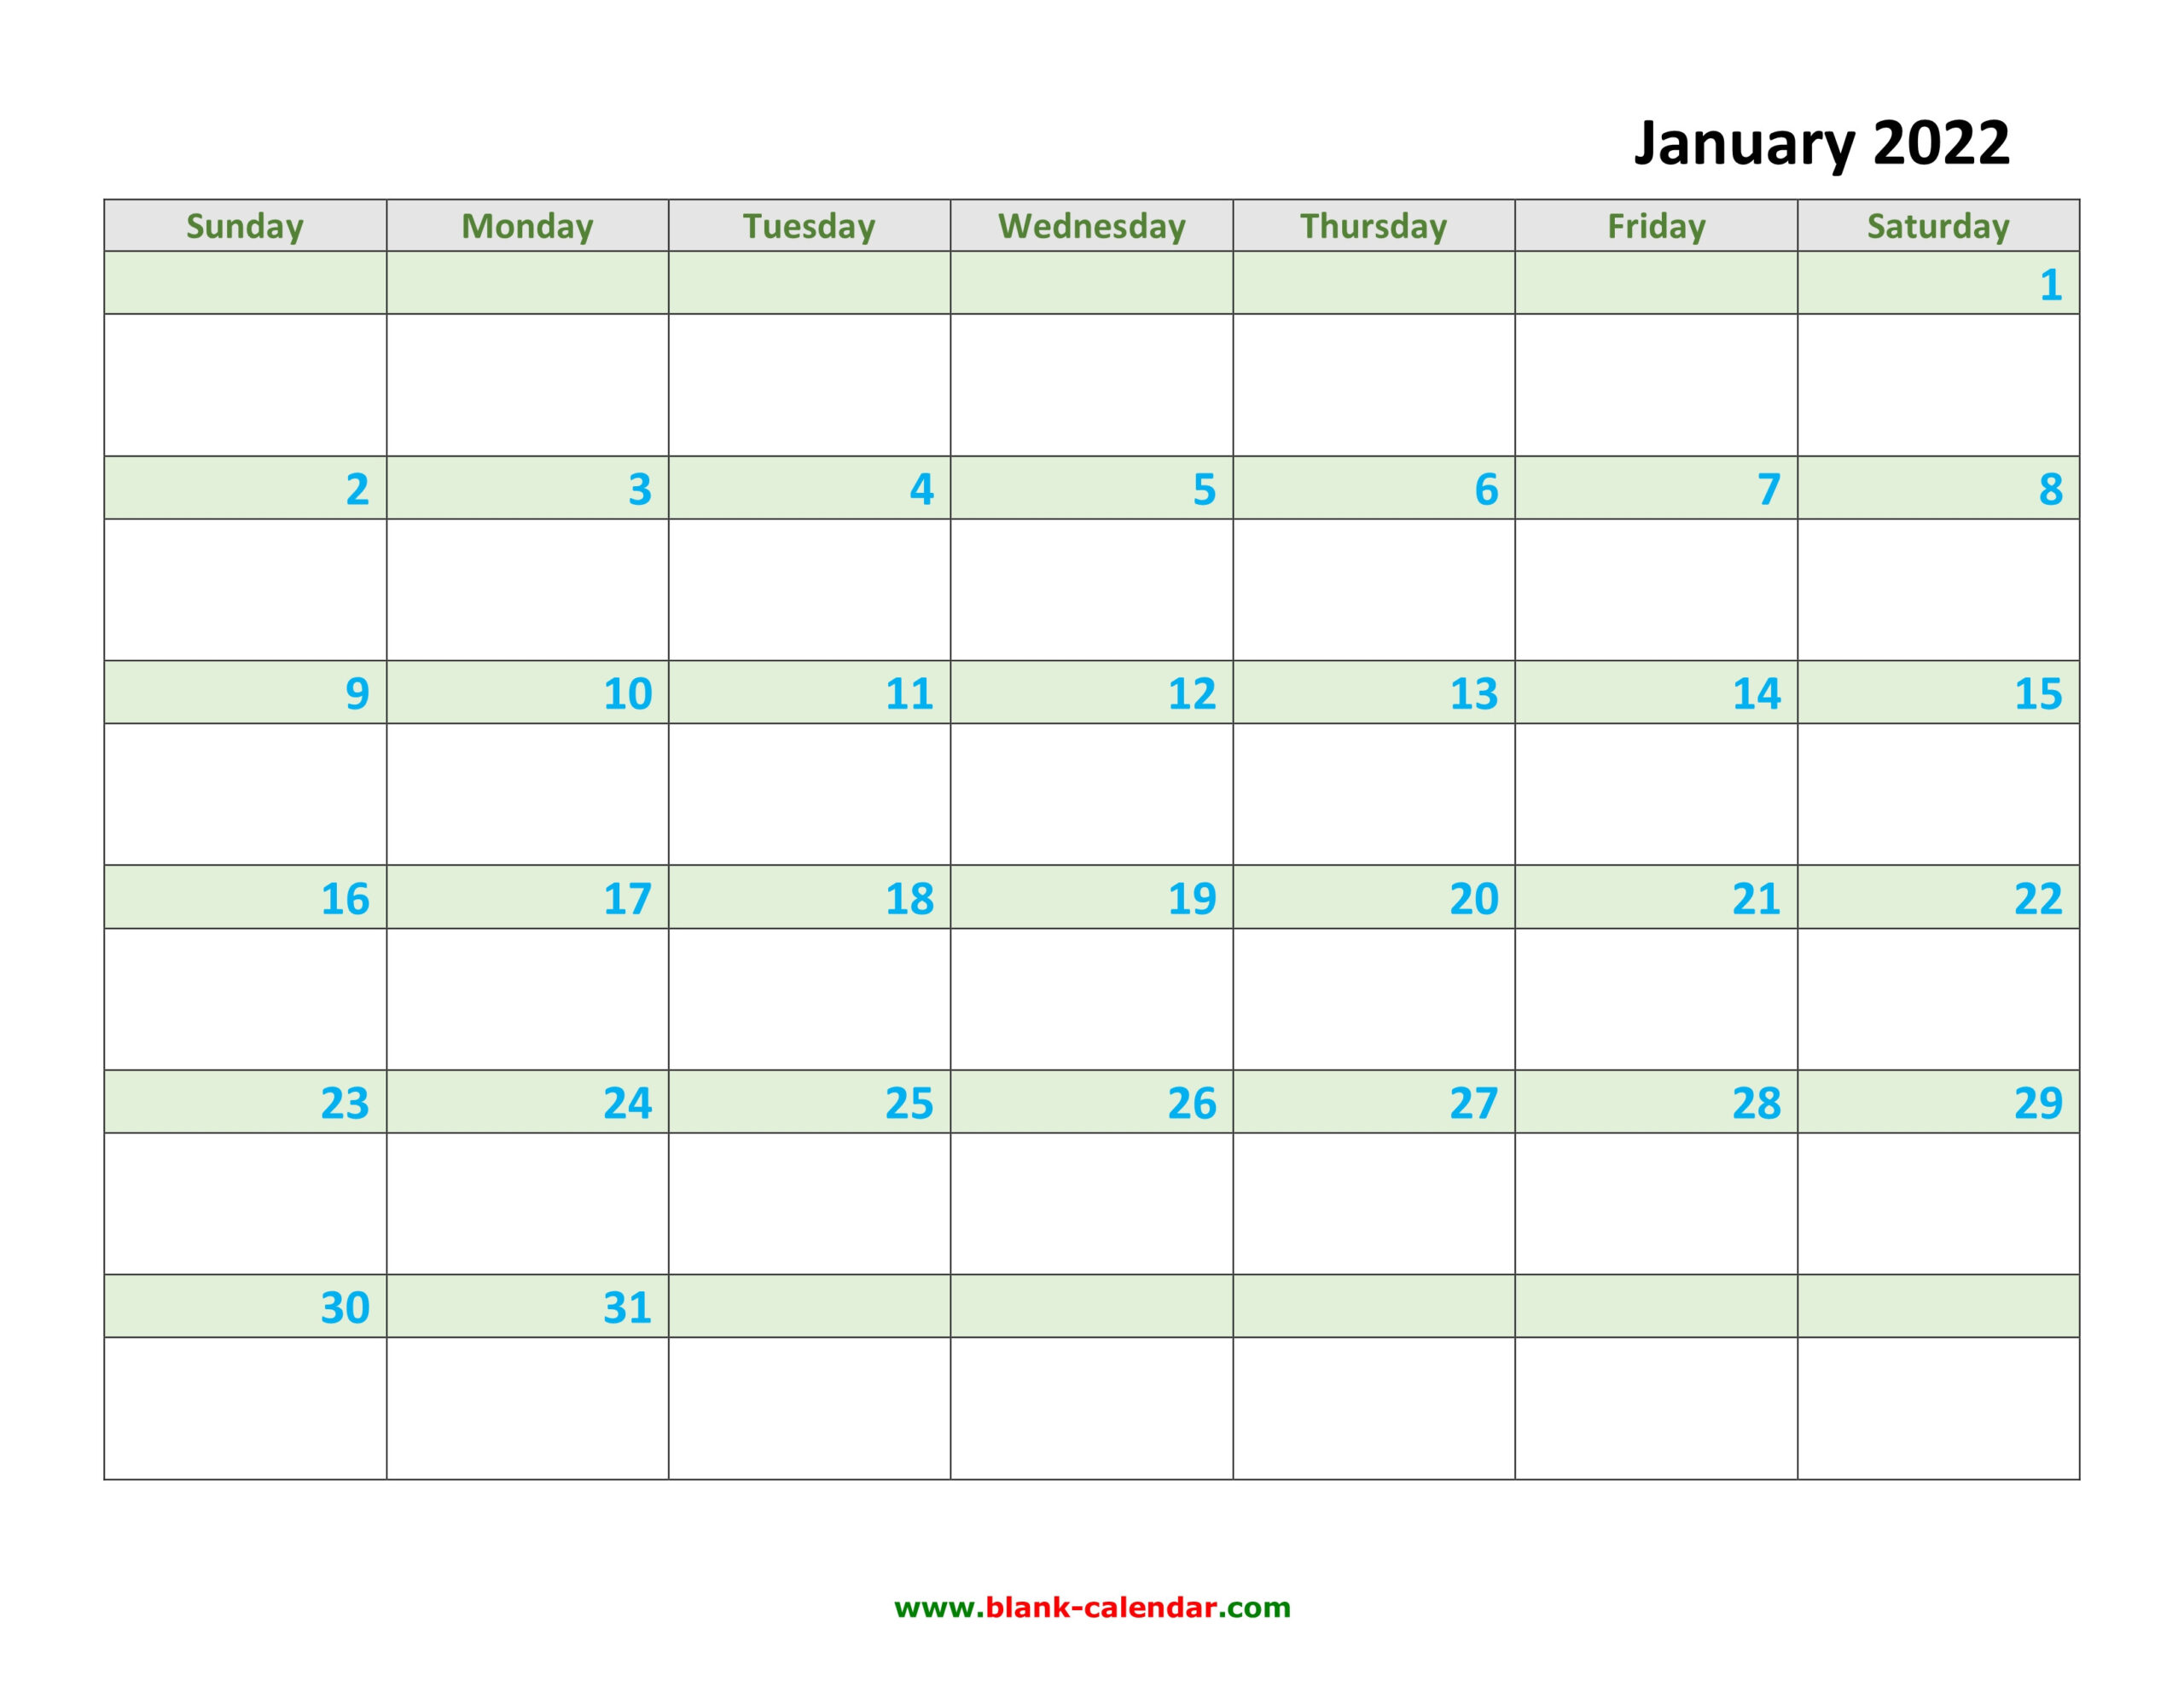 Monthly Calendar 2022 | Free Download, Editable And Printable  Free Printable Calendar 2022 Quarterly